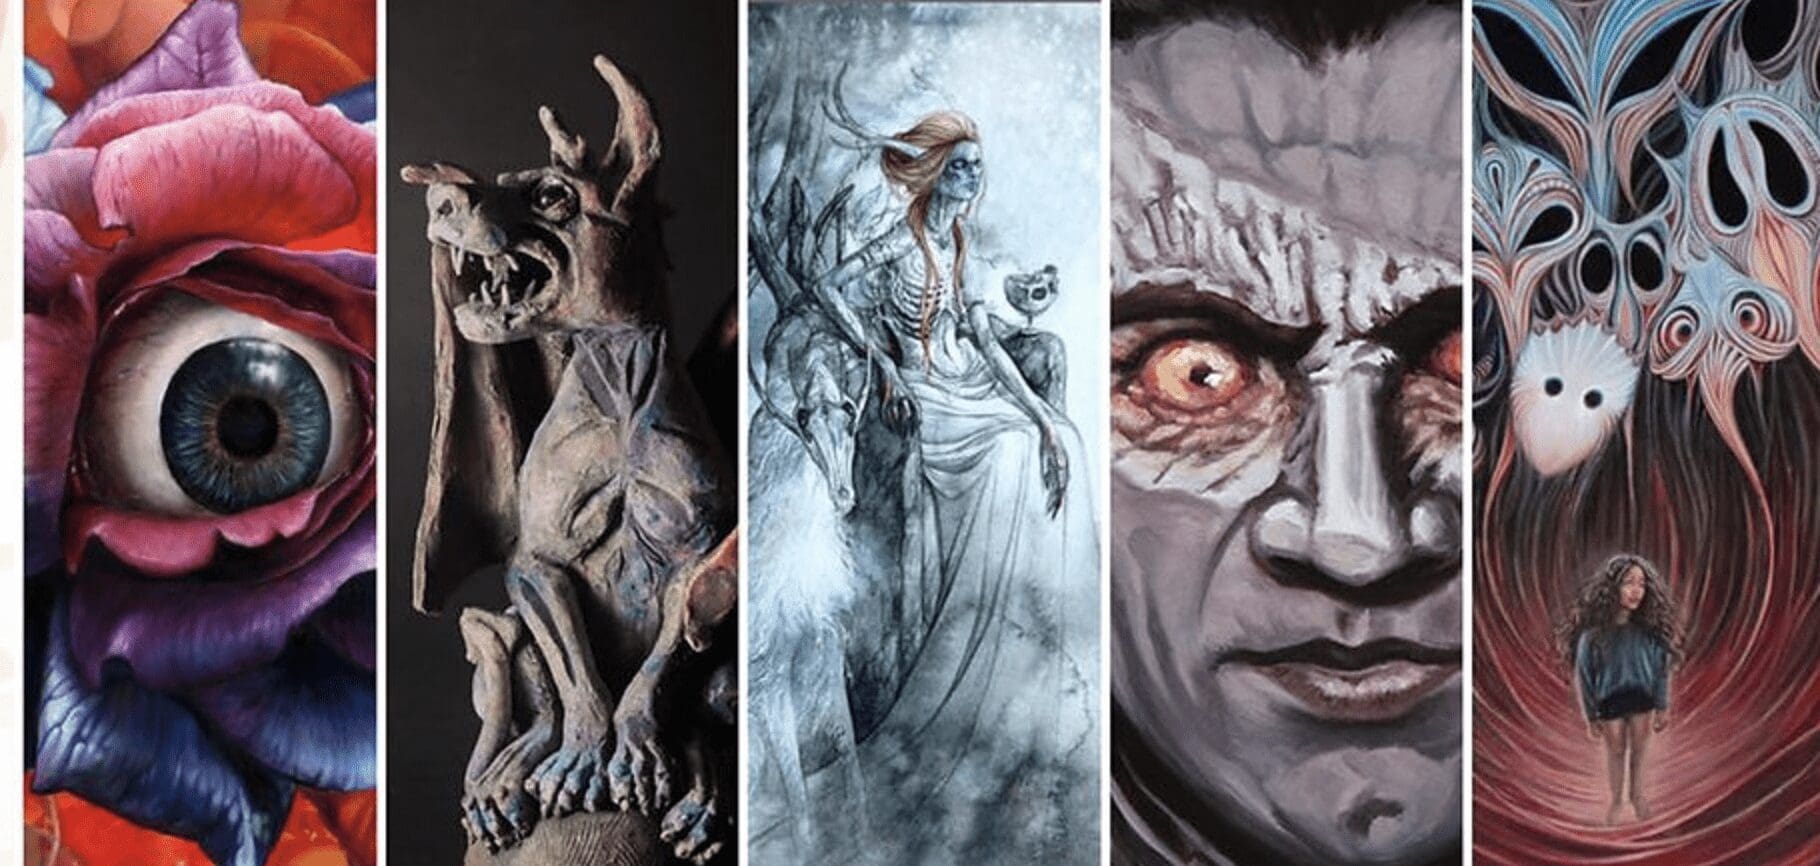 A collage of different paintings of demons and monsters.